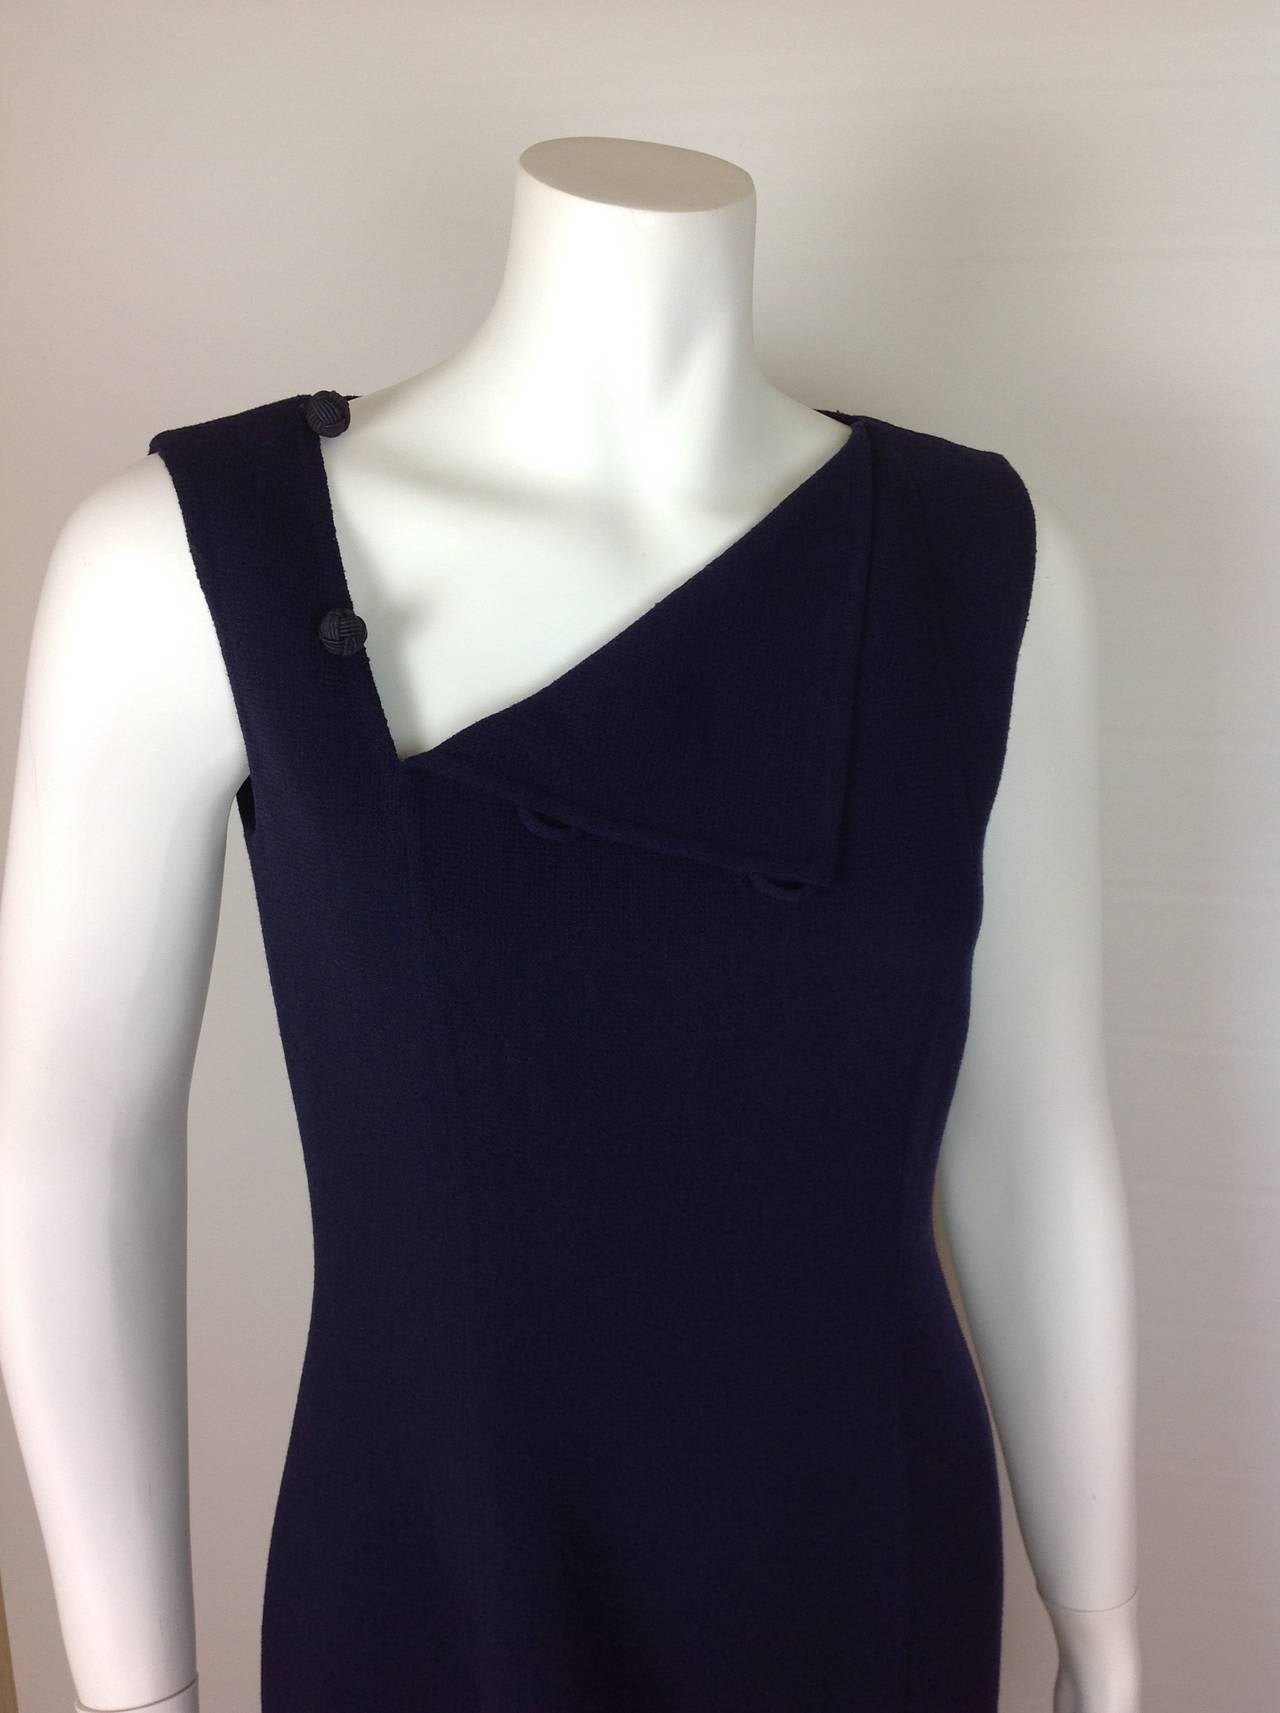 Beautiful navy Bill Blass crepe sheath, made in the USA.
Fully lined, with 22.50